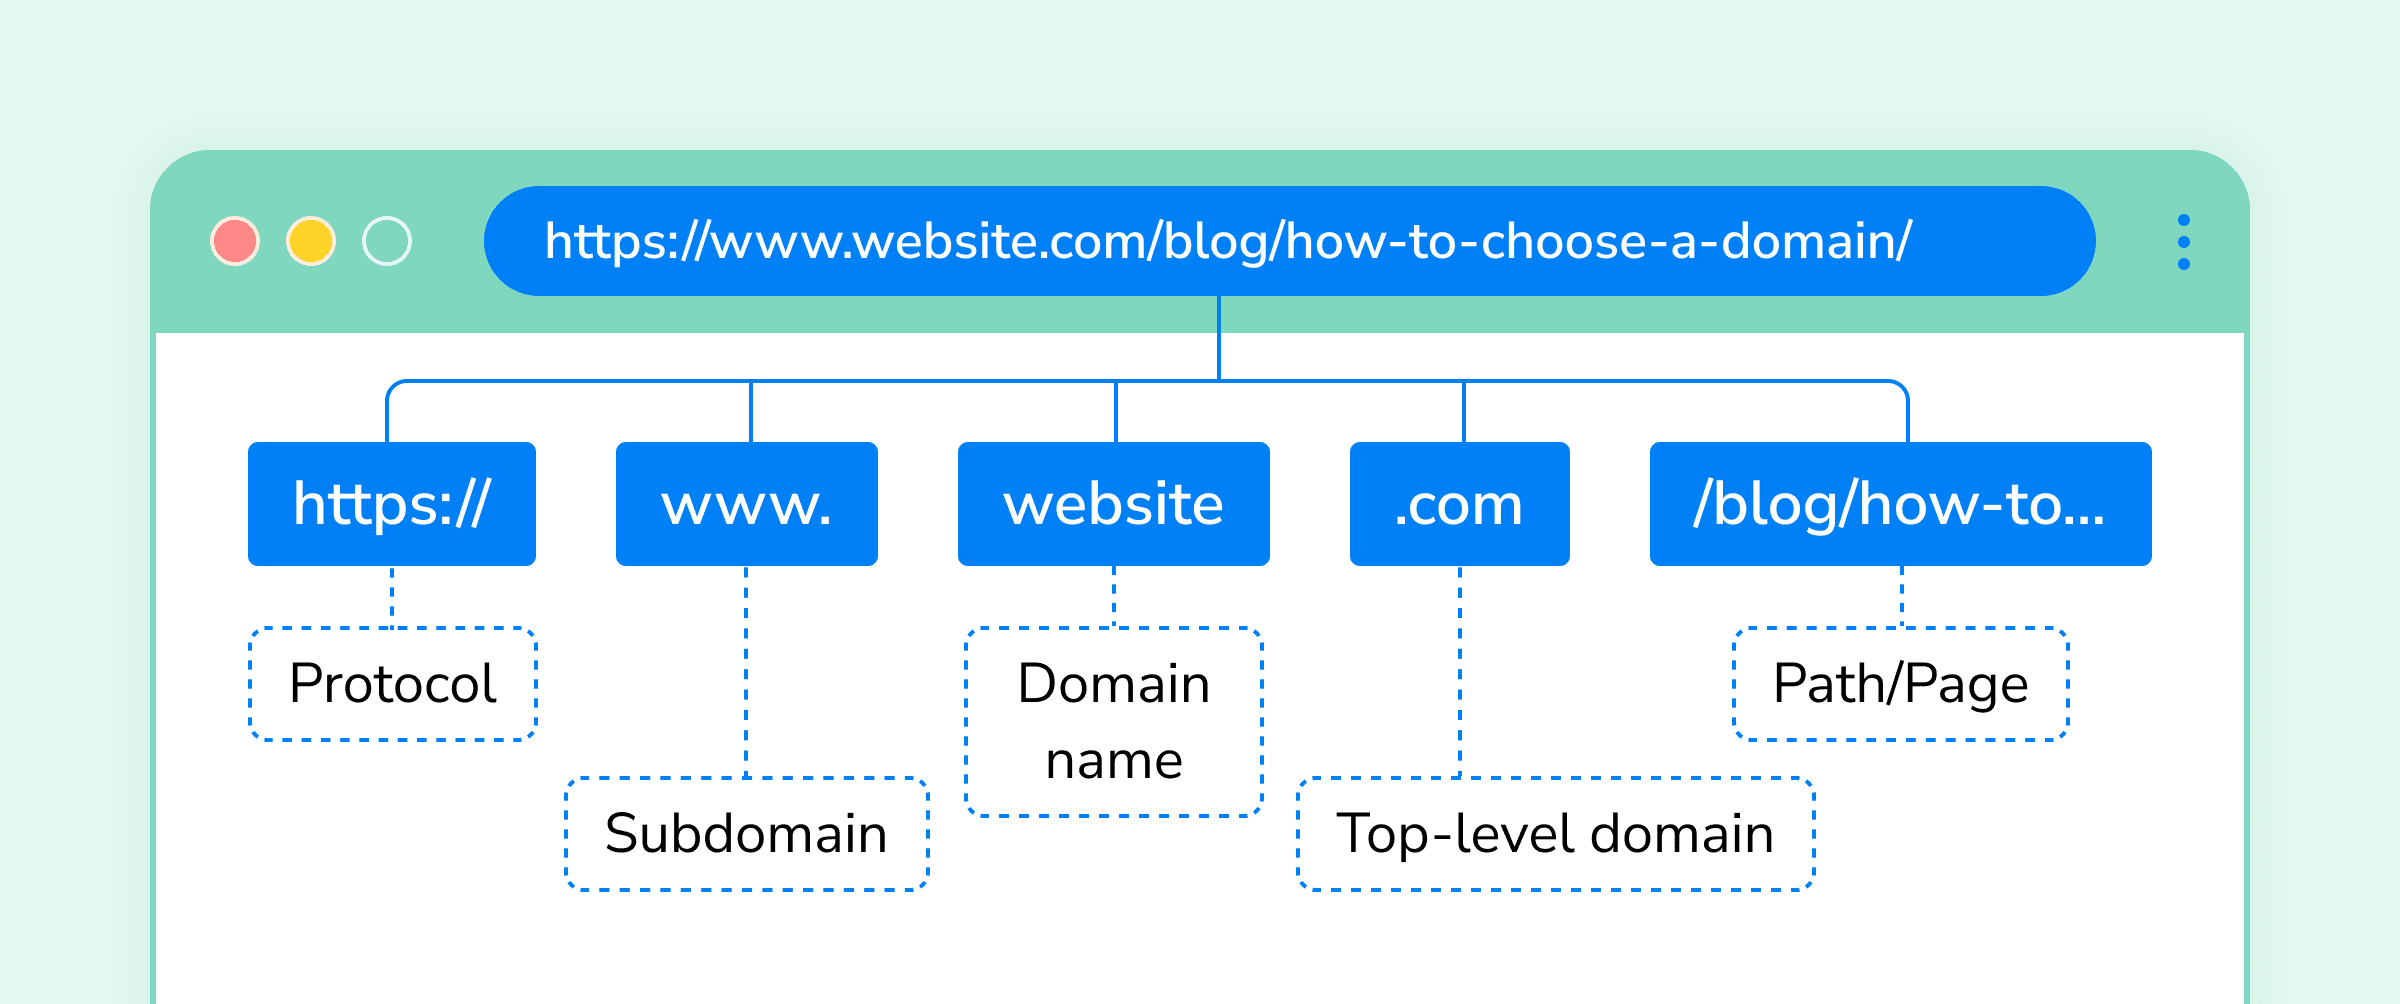 The general structure of the URL